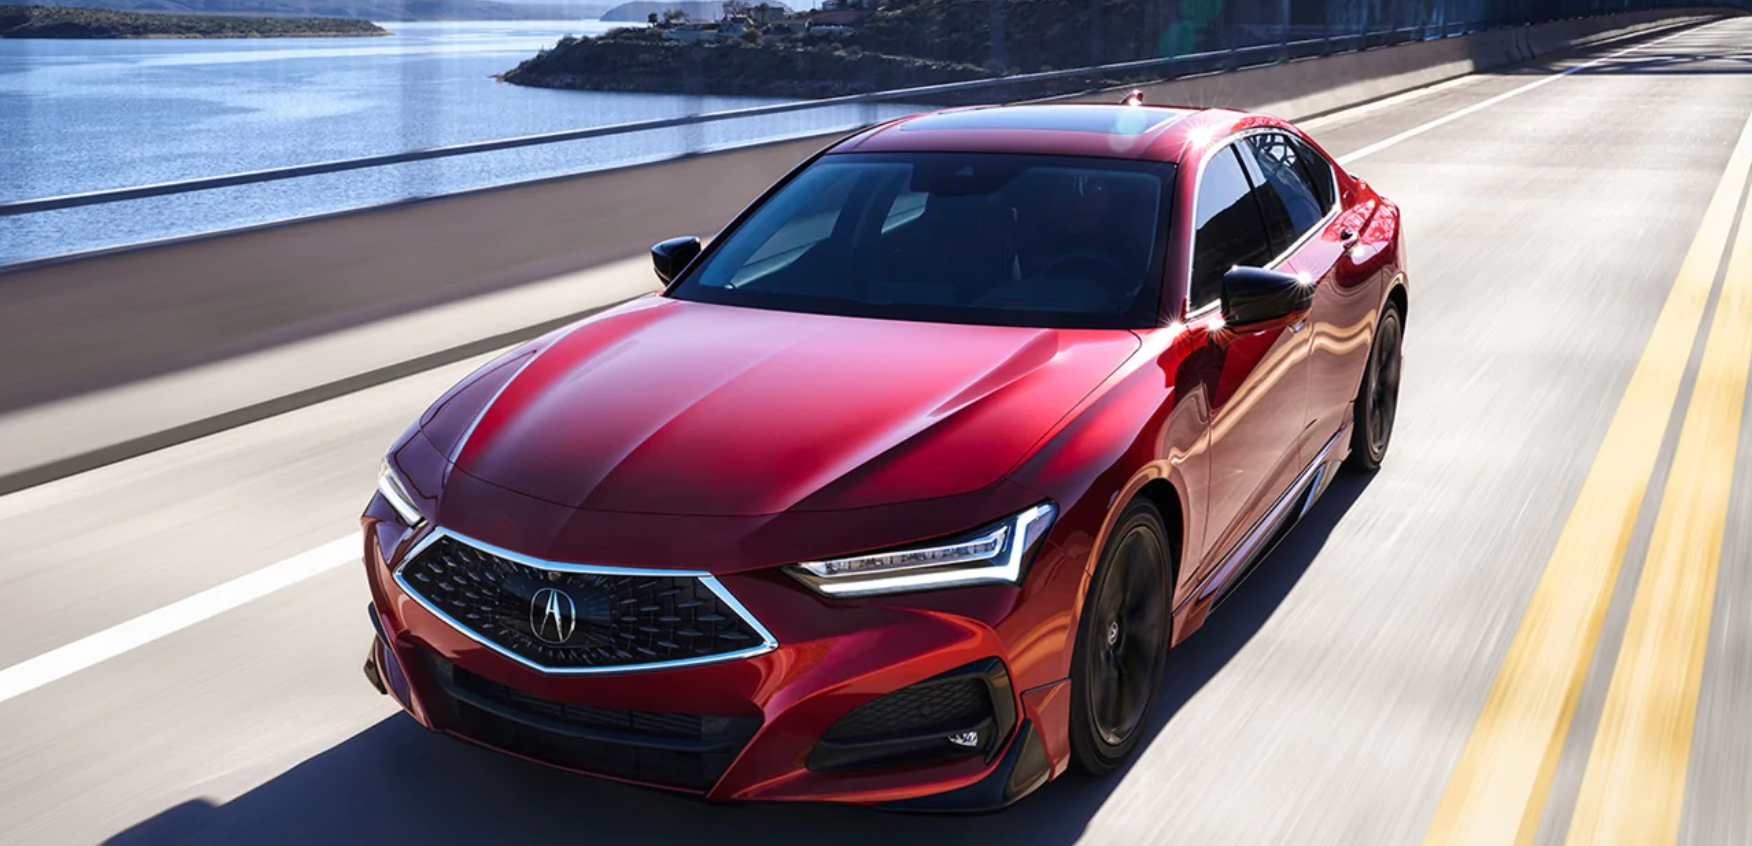 Test Drive the 2021 Acura TLX in Greenwood | Hubler Acura